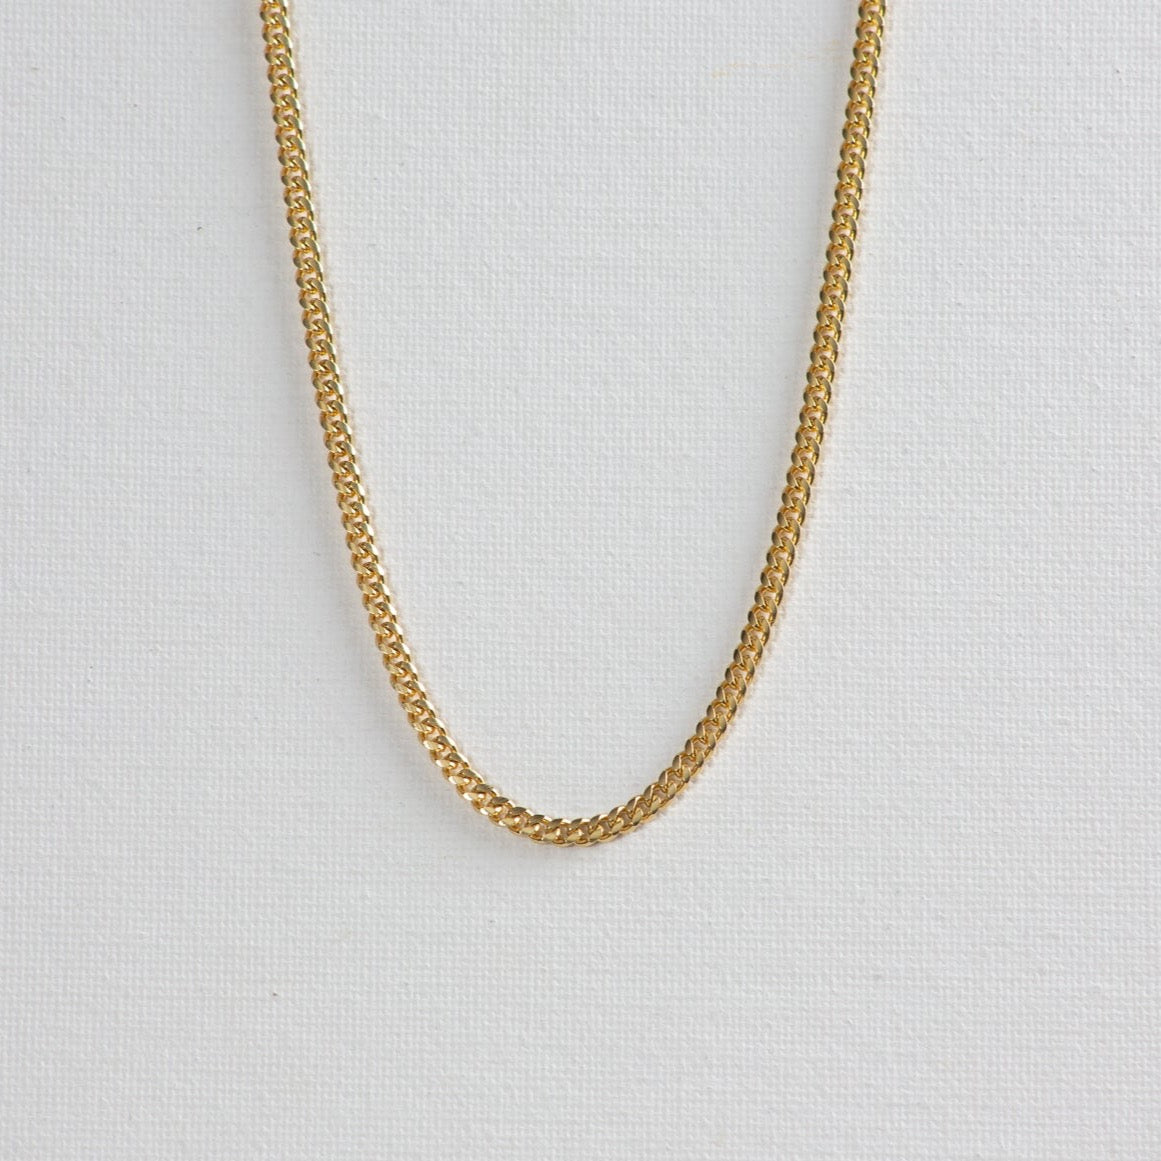 Cuban chain necklace on a clean white background. The necklace features interlocking, tightly-woven links, exuding a sense of elegance and strength.